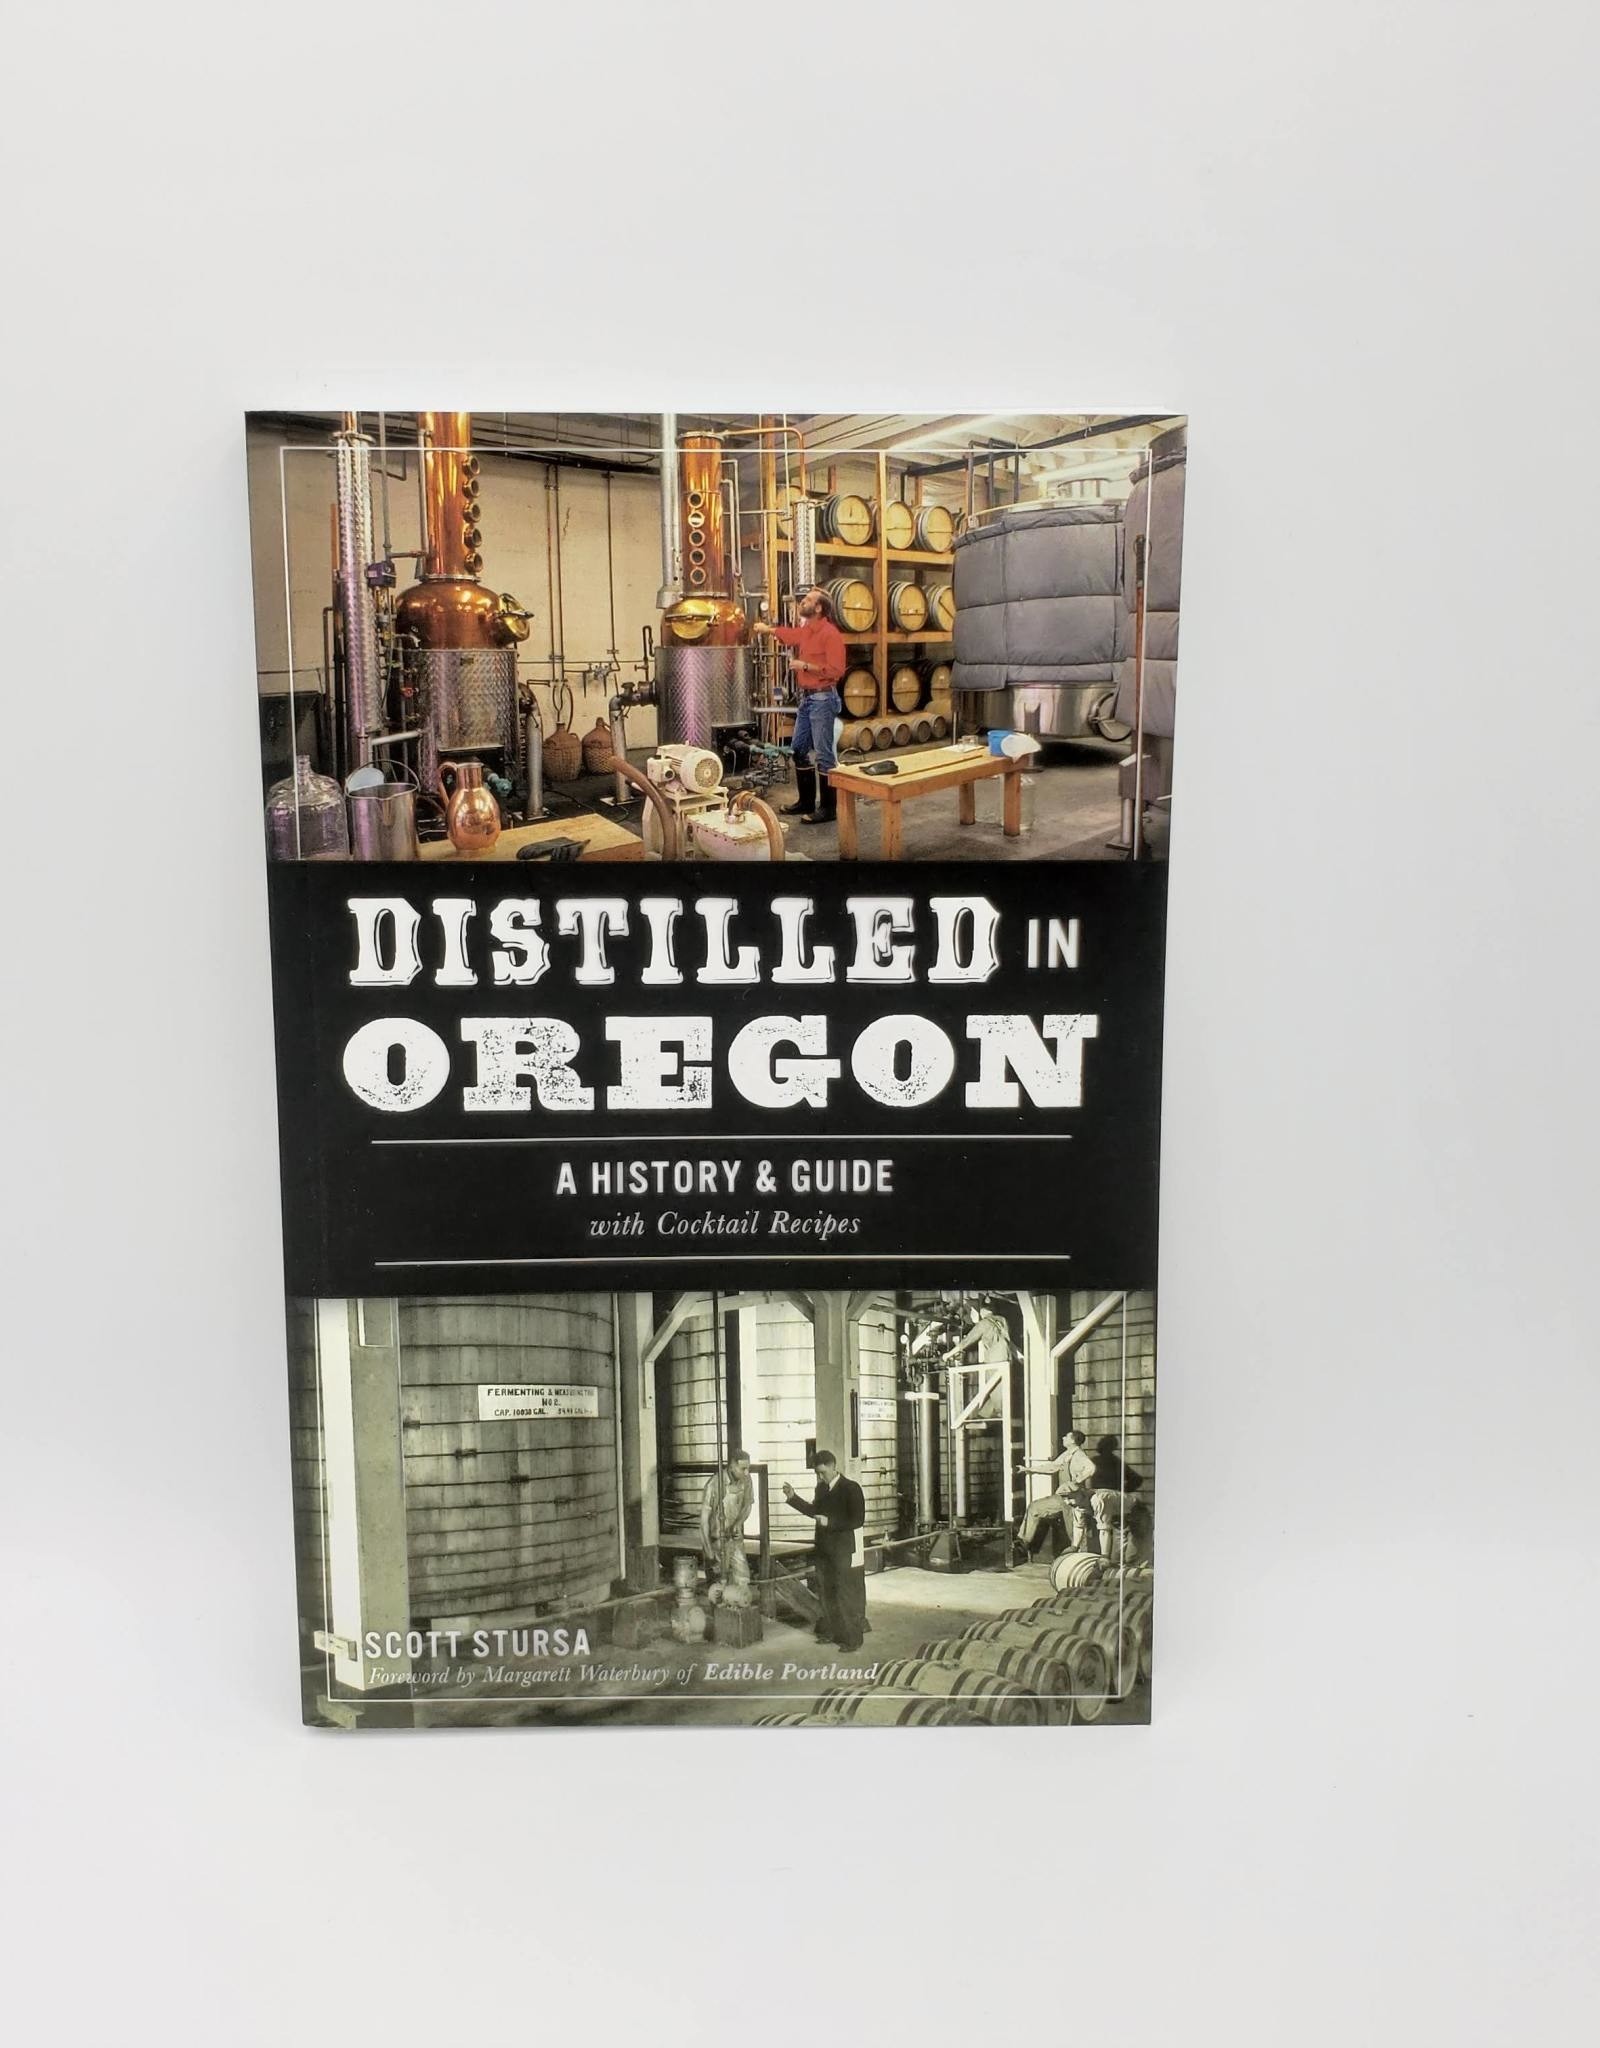 Distilled in Oregon: A History & Guide with Cocktail Recipes By Scott Stursa, Foreword by Margarett Waterbury of Edible Portland